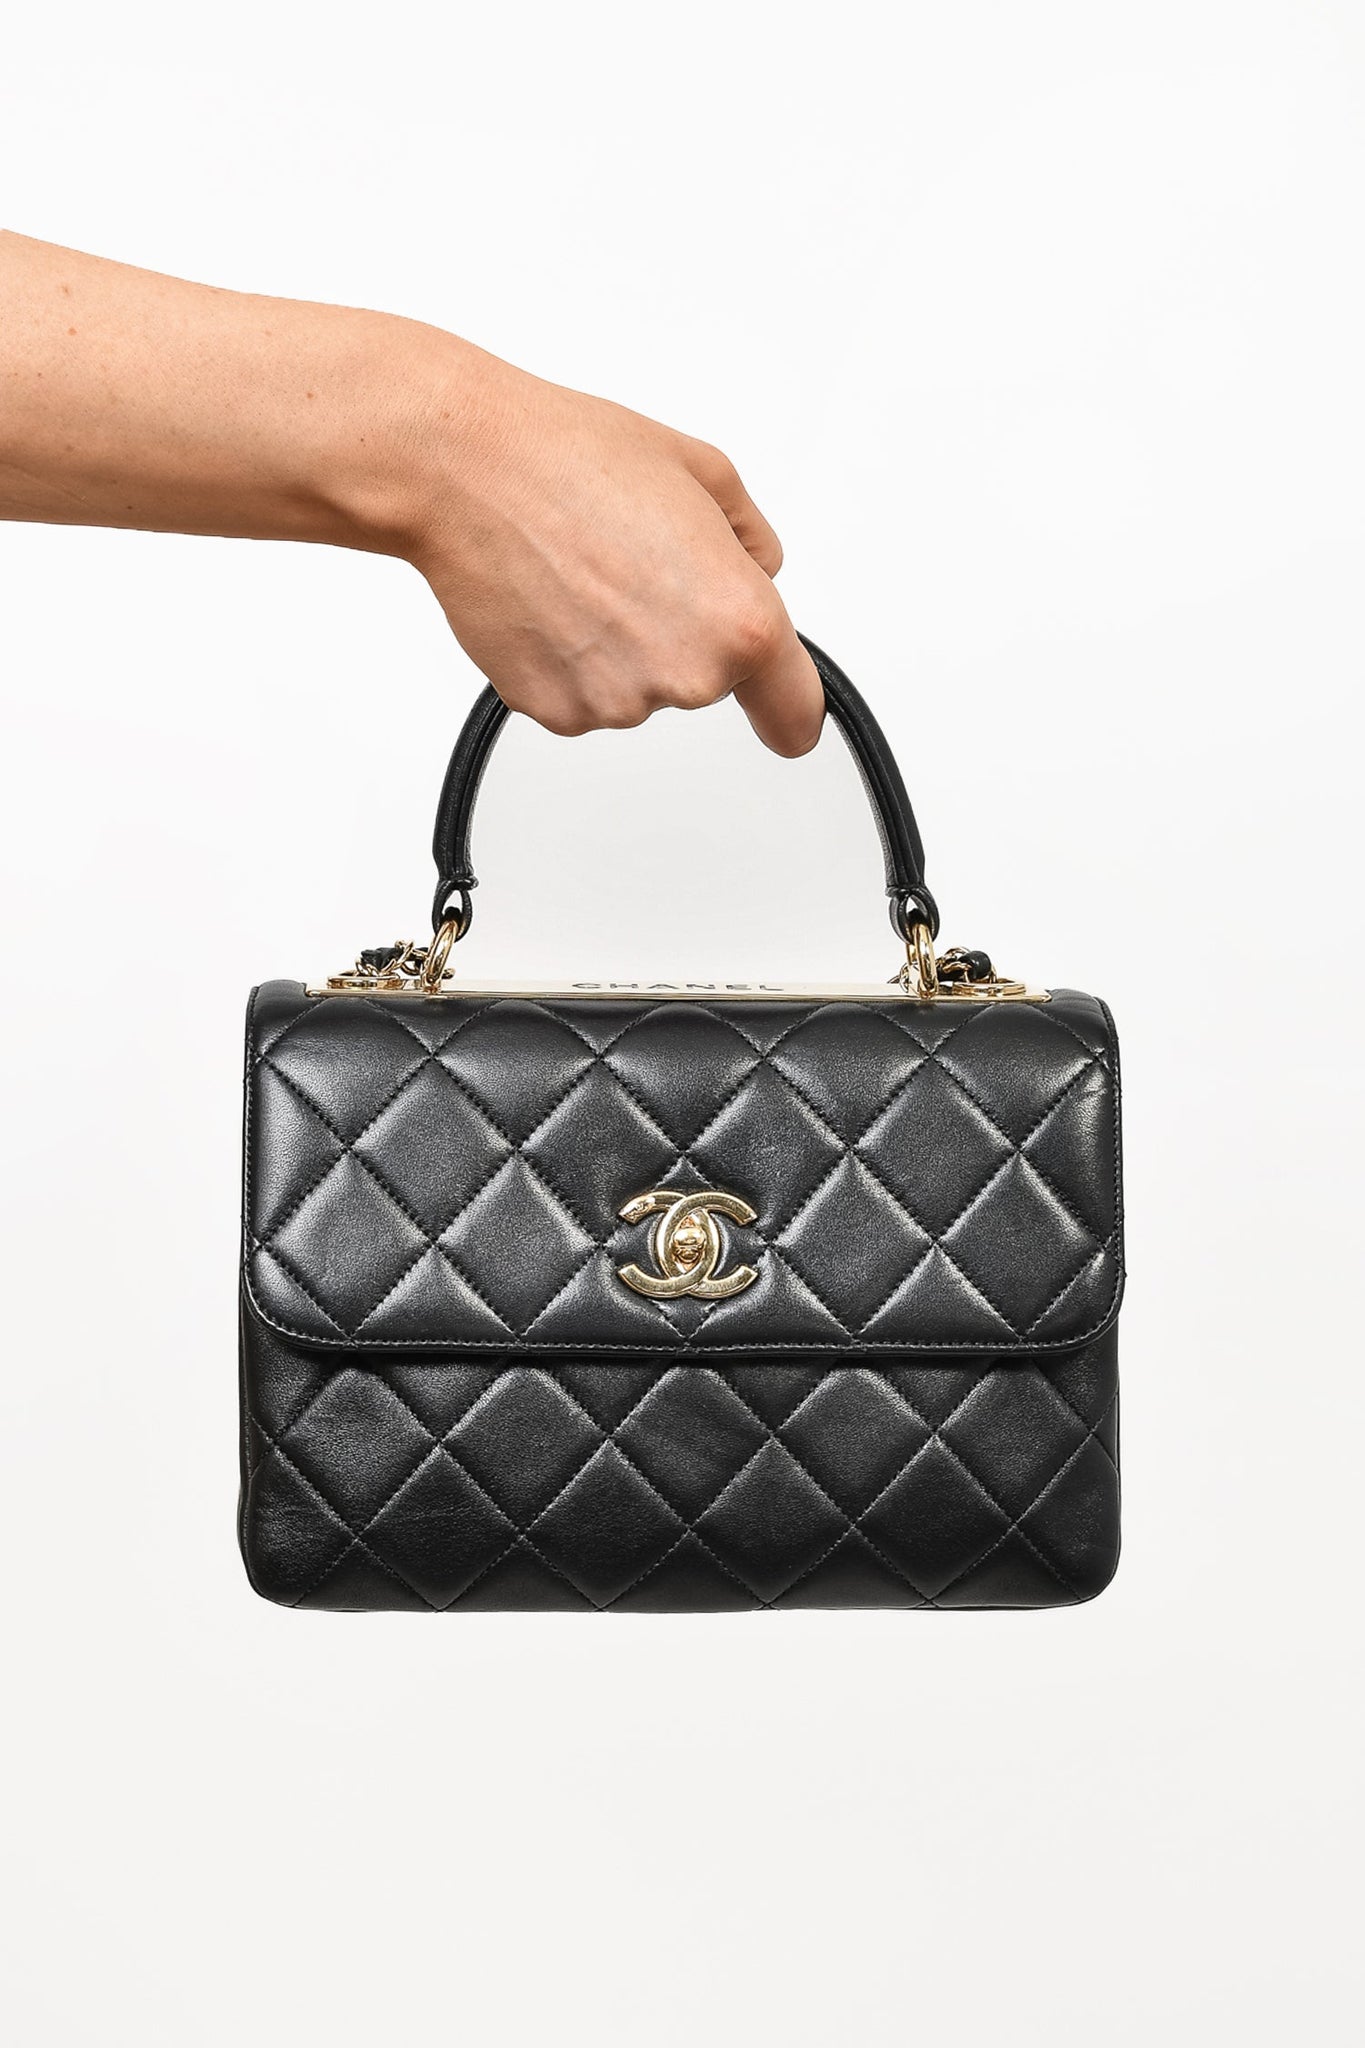 Chanel Black Lambskin Trendy Flap Bag with Top Handle